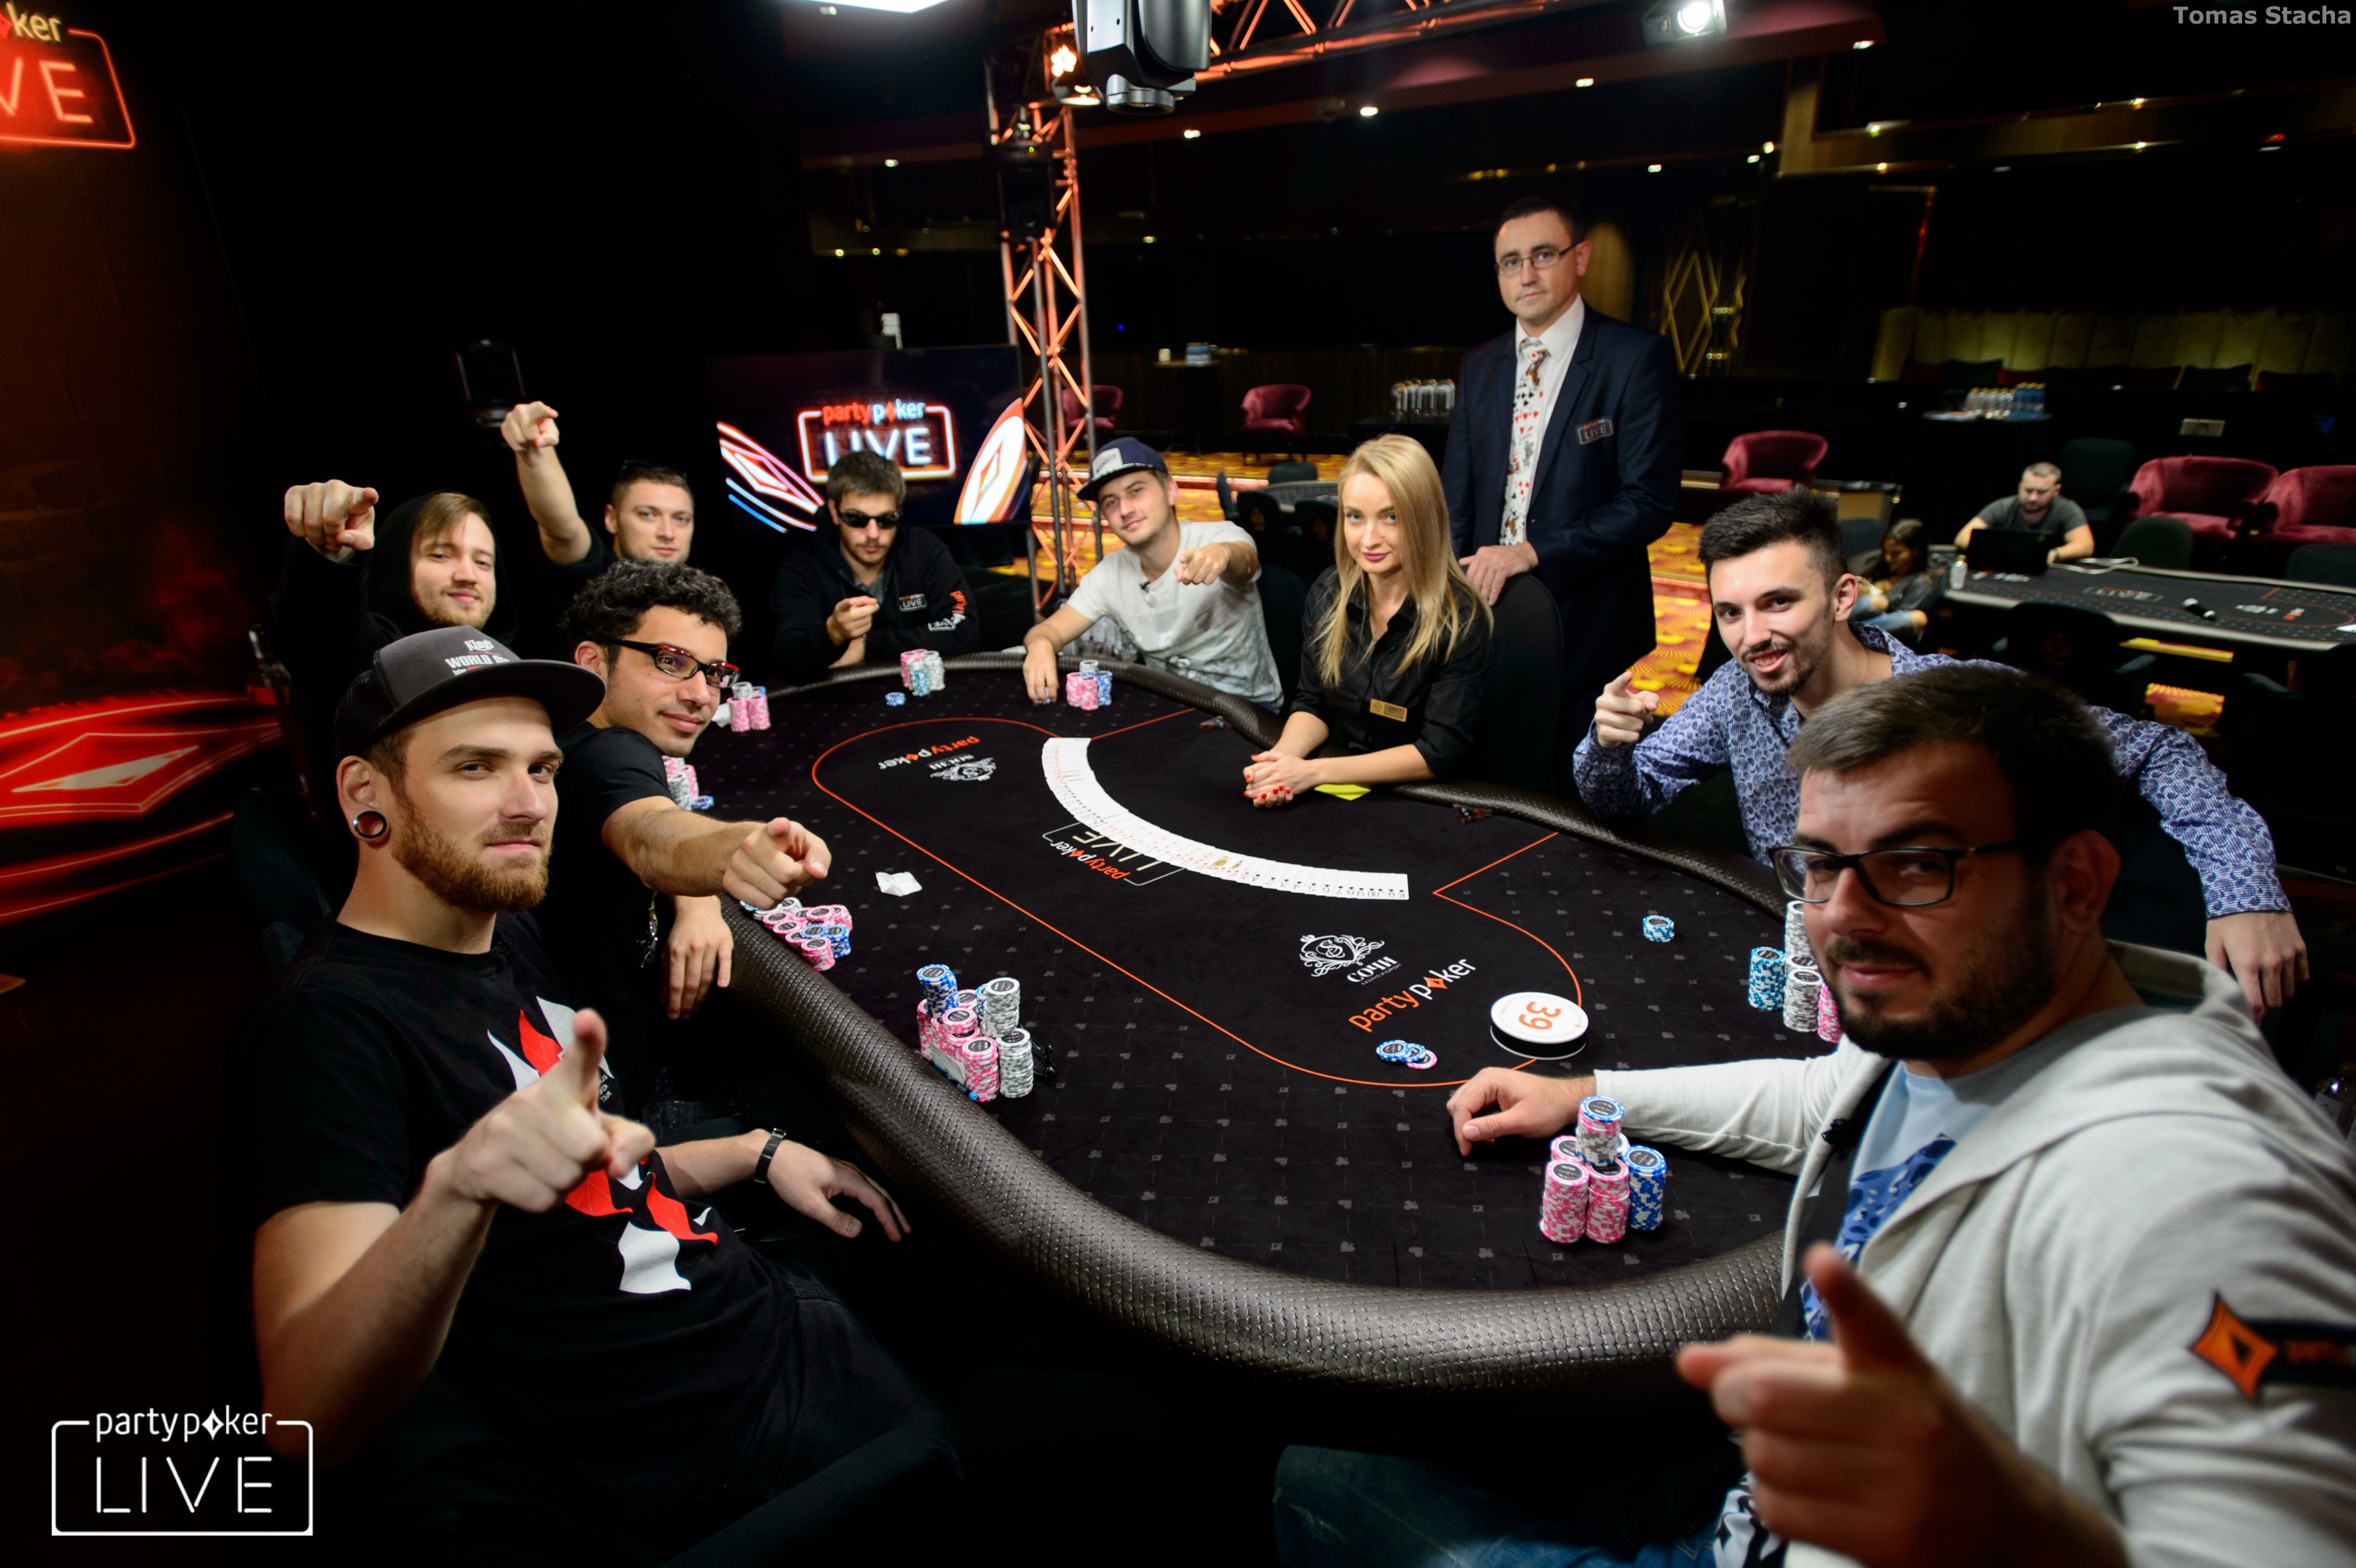 nose cleaner recovery Storm Brewing as Players Accuse Partypoker of Shady Tournament Tactics